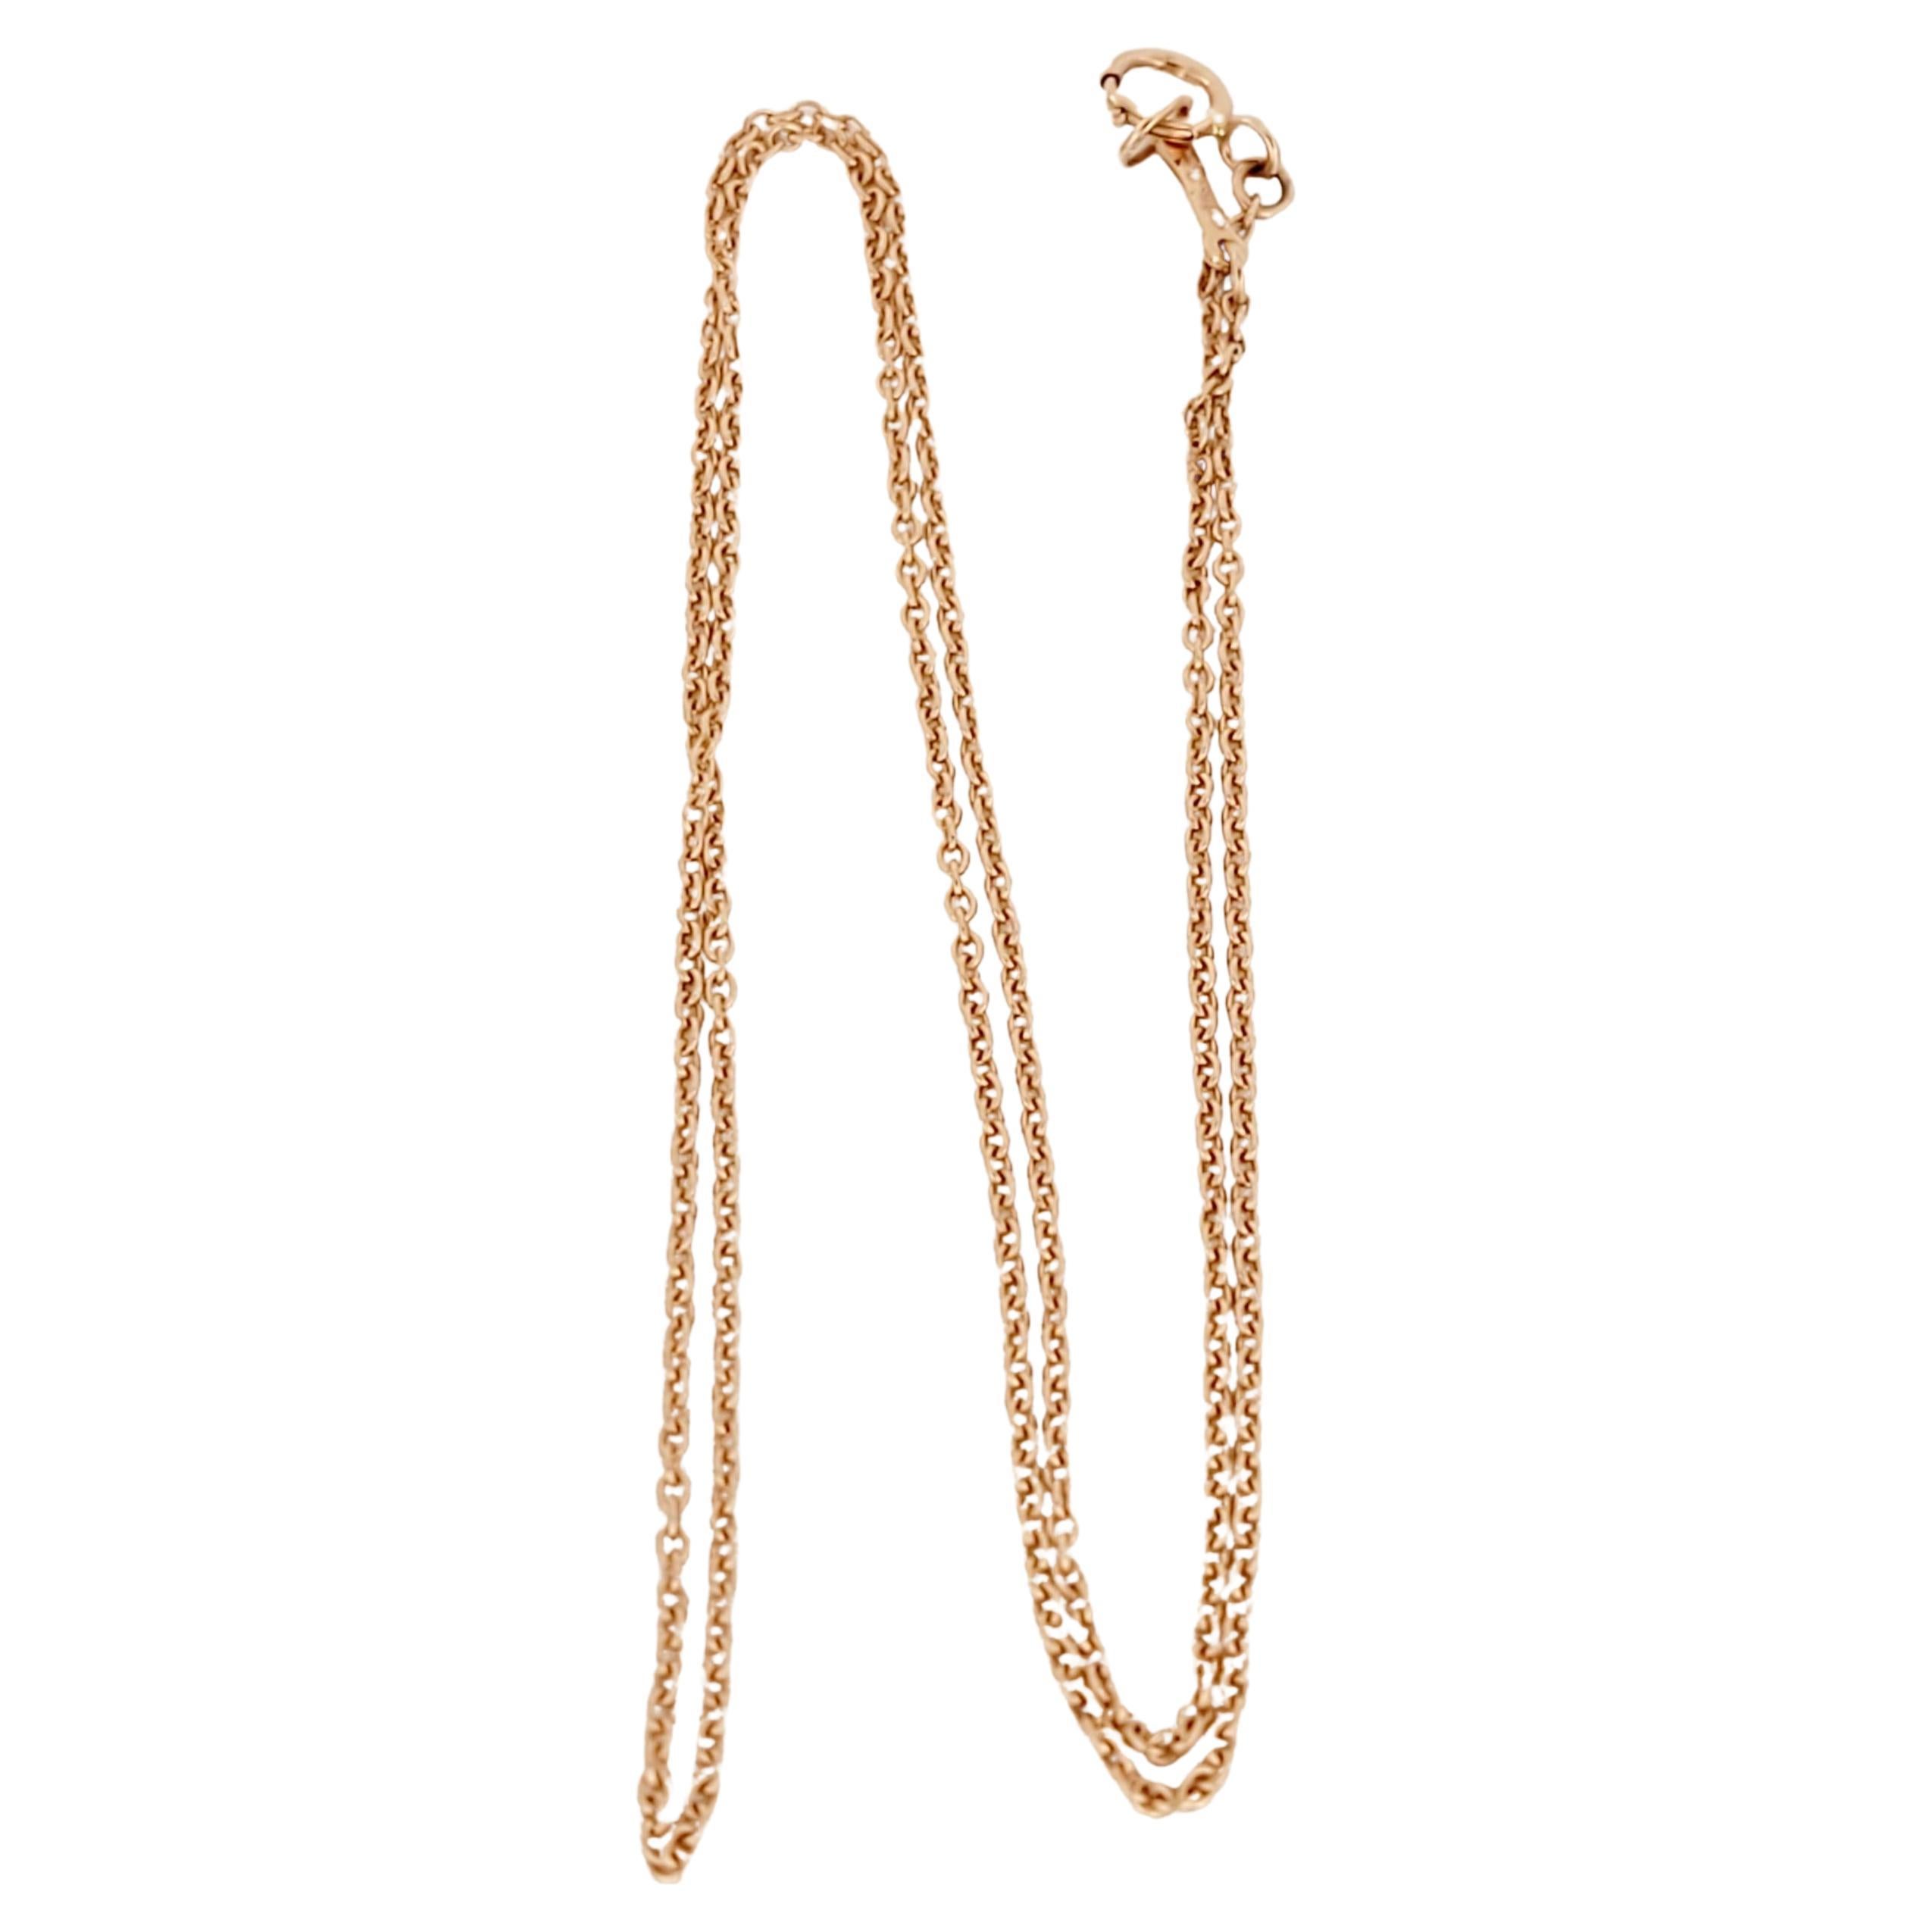 Paloma Picasso Tiffany & Co Kette 18K Roségold 16'' lang